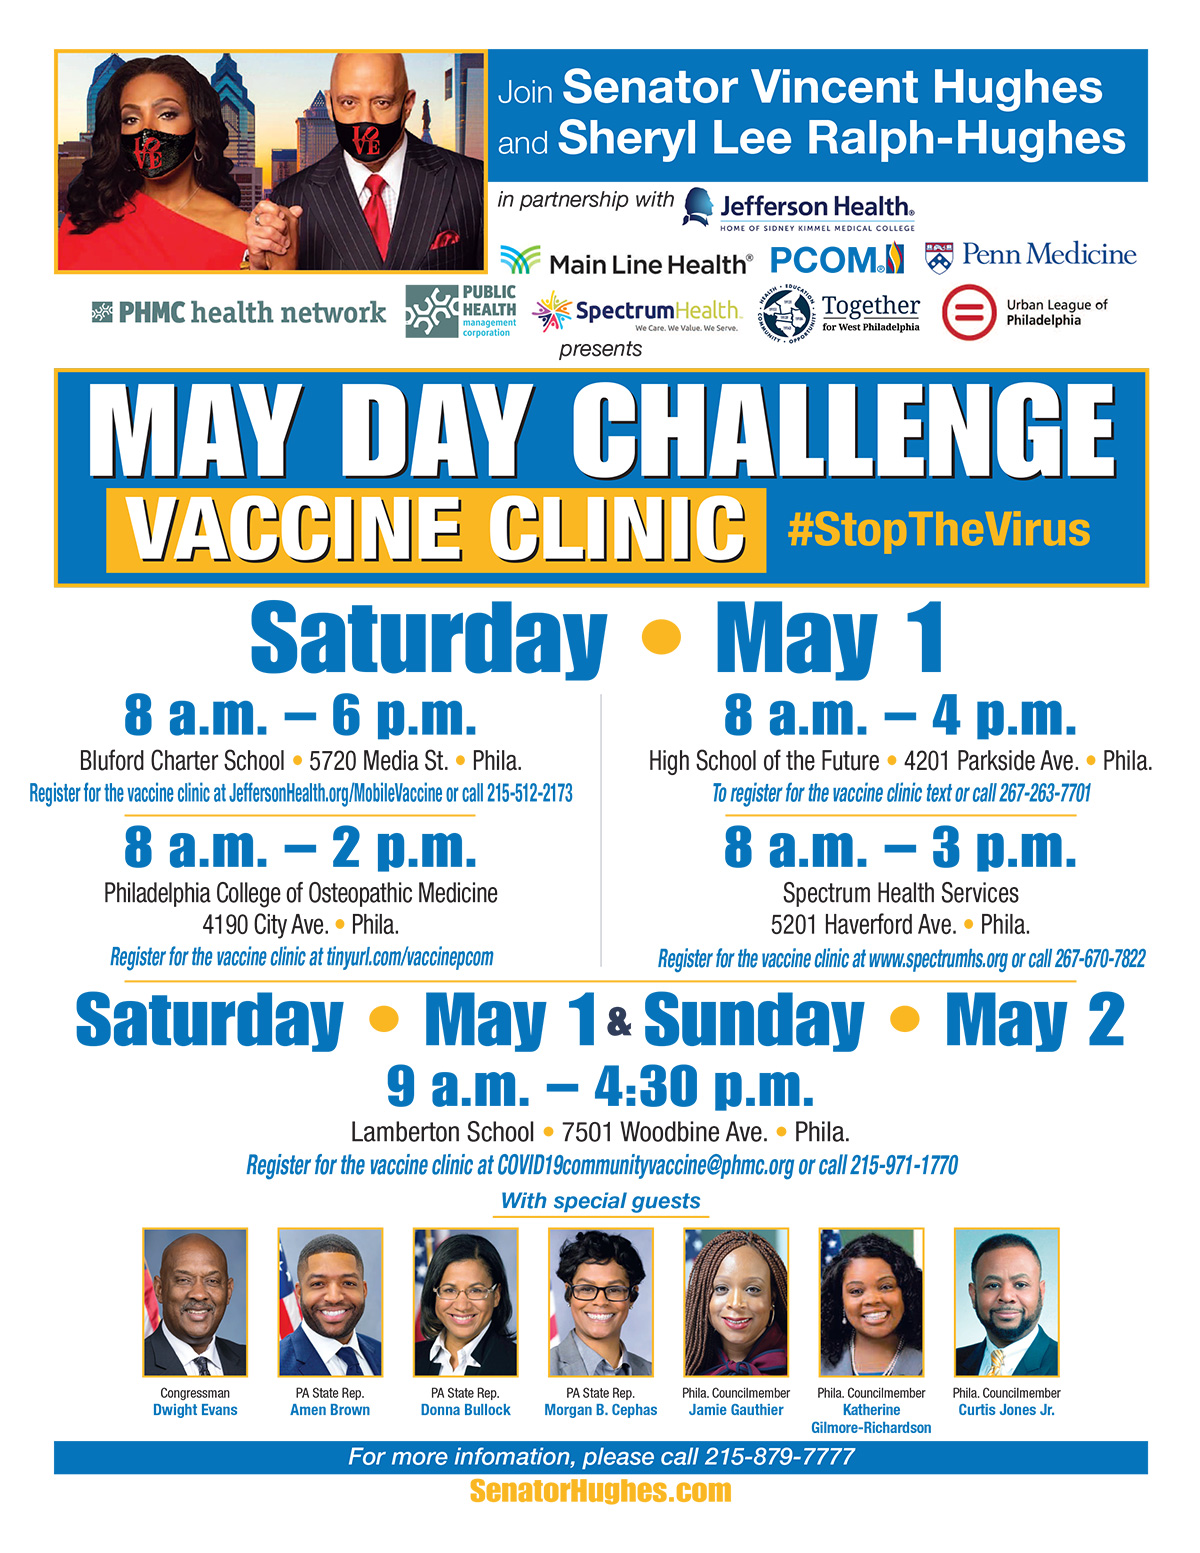 May Day Challenge